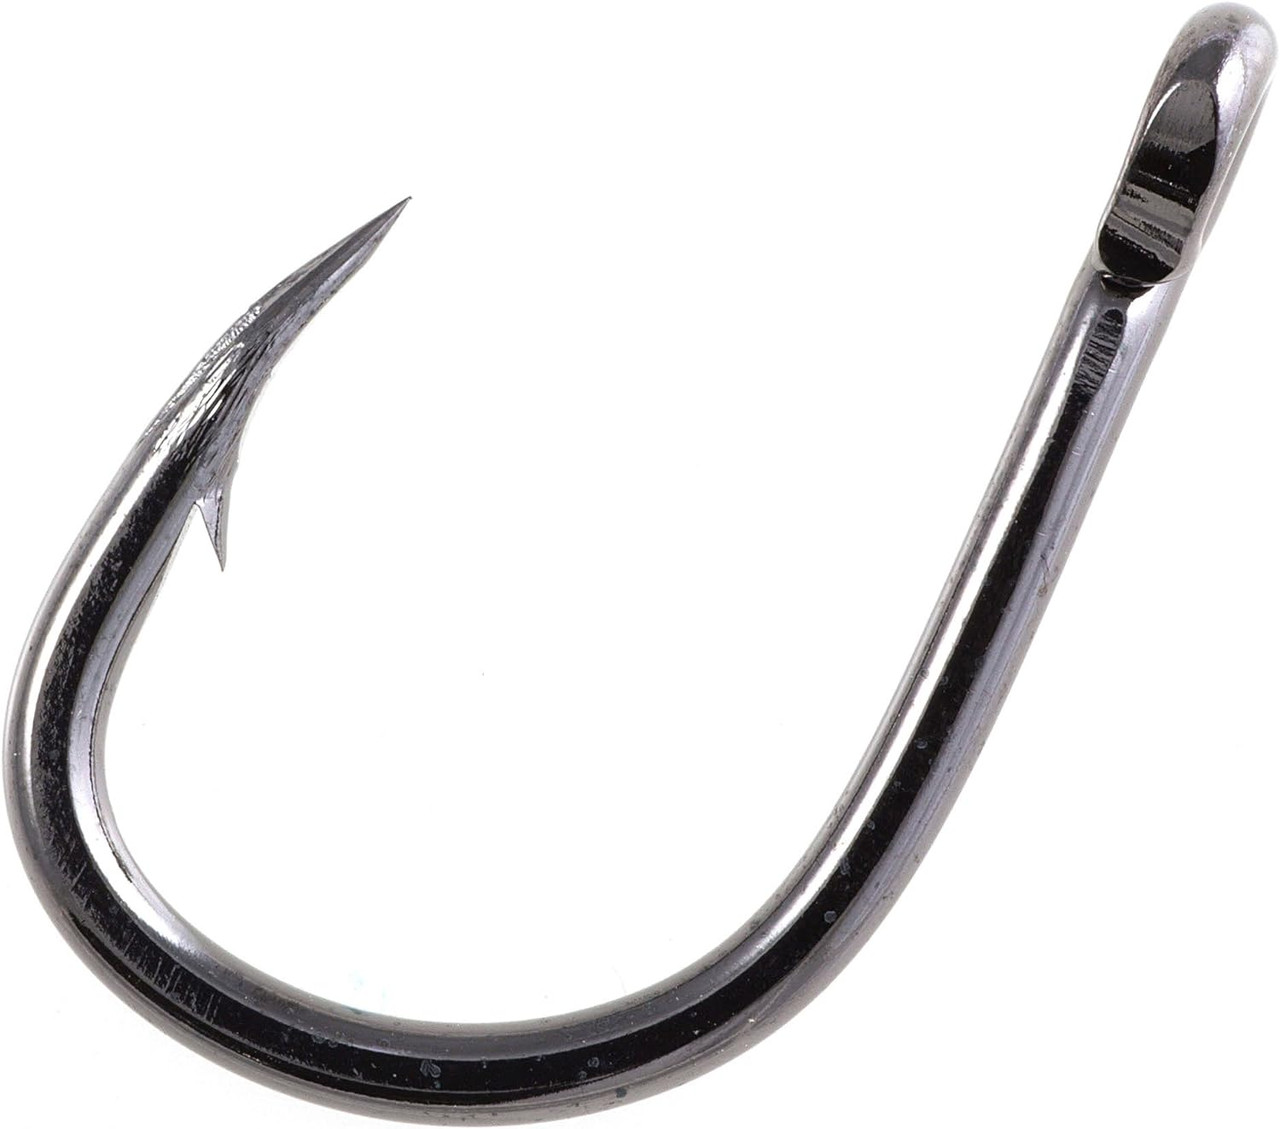 Owner American 5105-111 Gorilla Live Bait Hook with Cutting Point Size 1/0